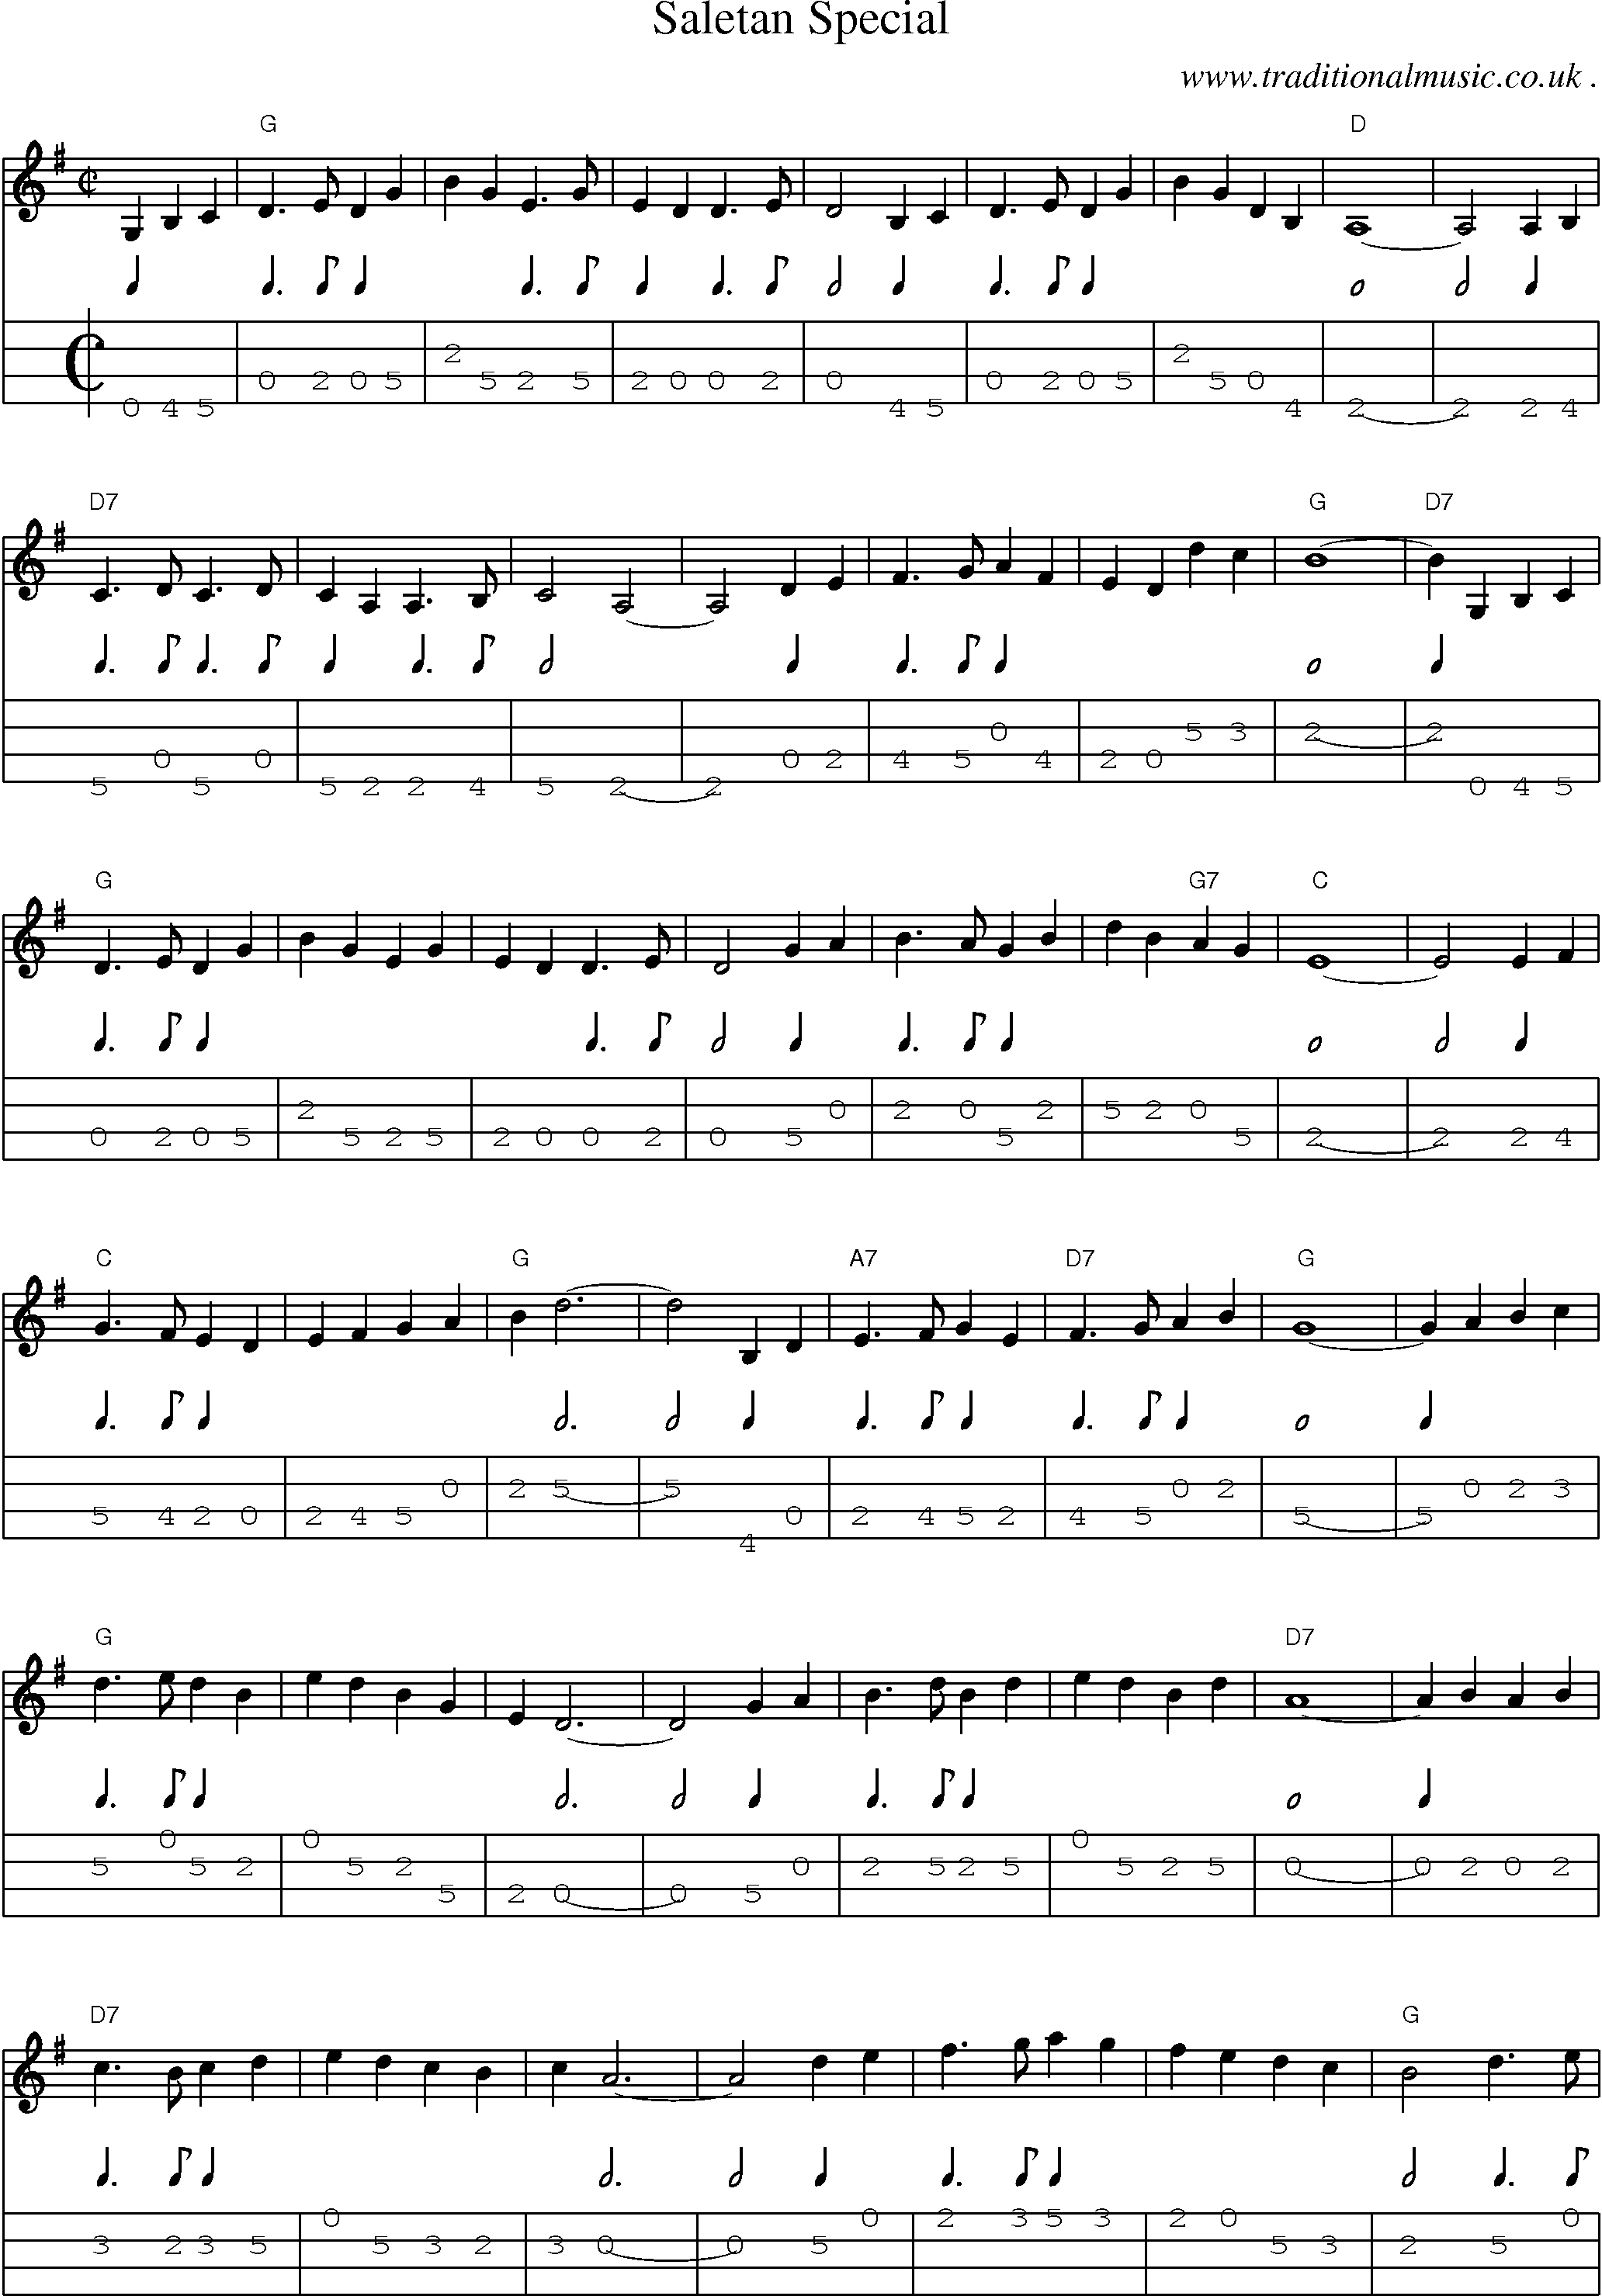 Music Score and Guitar Tabs for Saletan Special